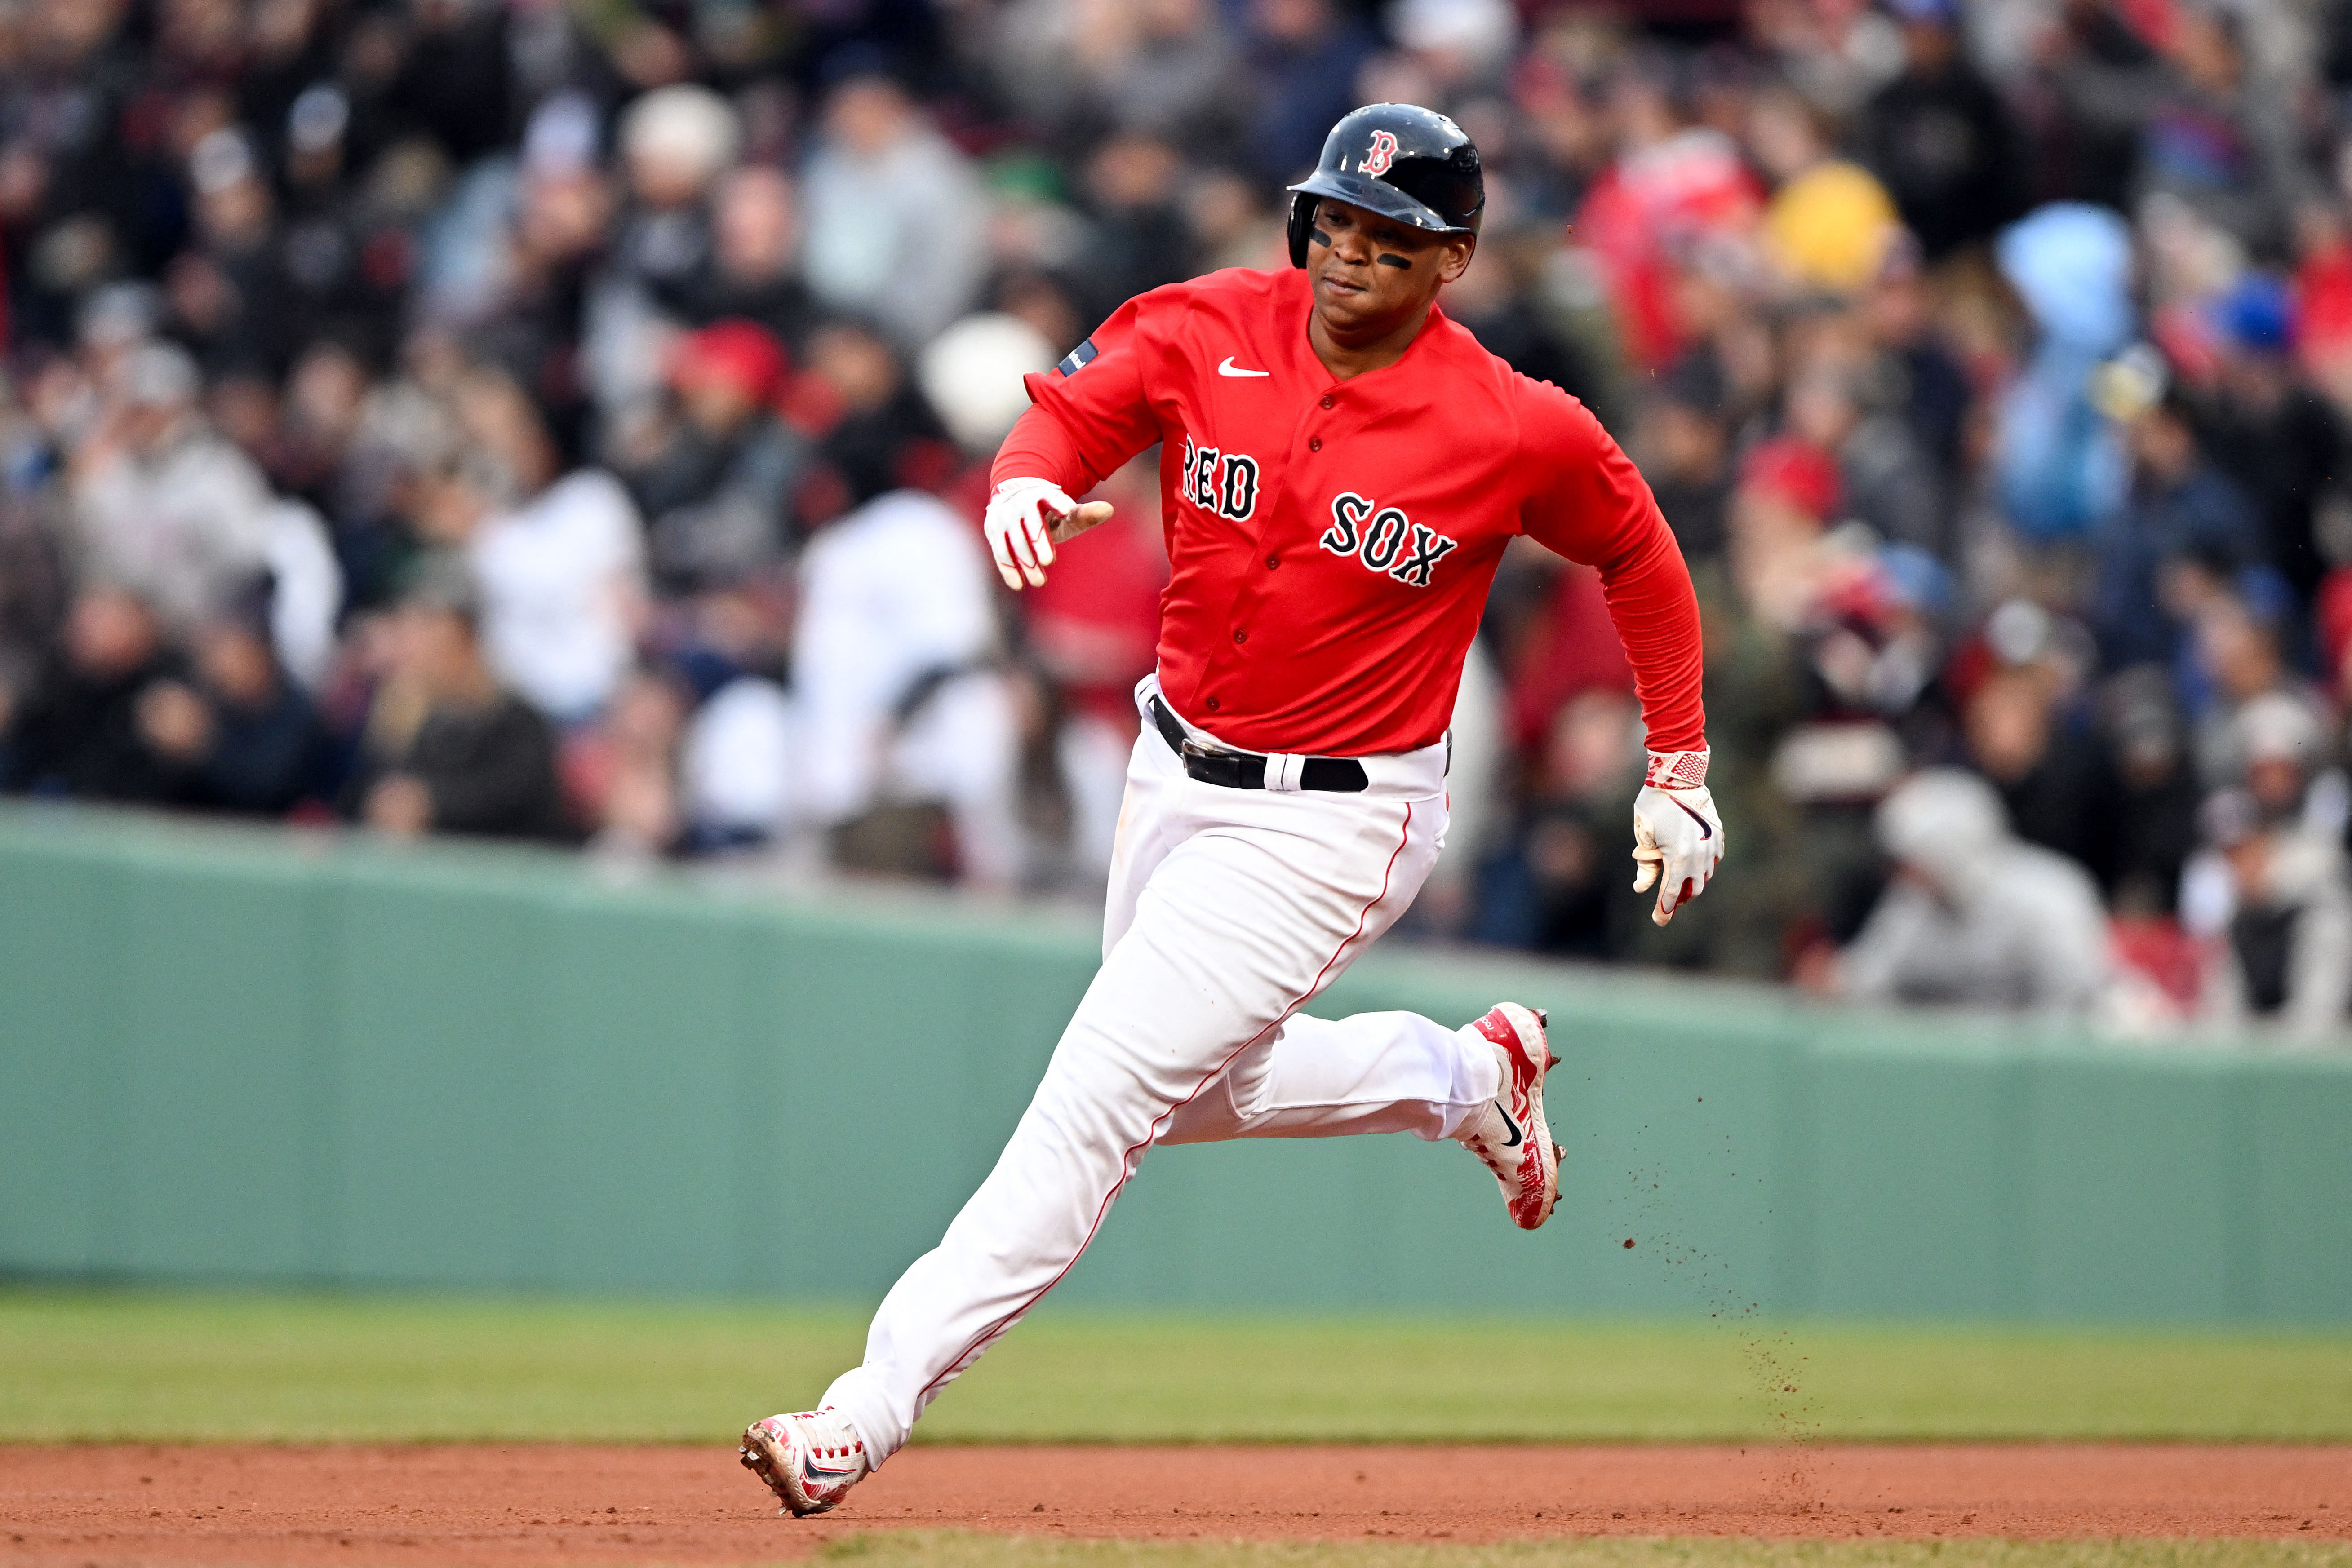 Red Sox bats deliver 11-5 rout for 4-game sweep of Jays